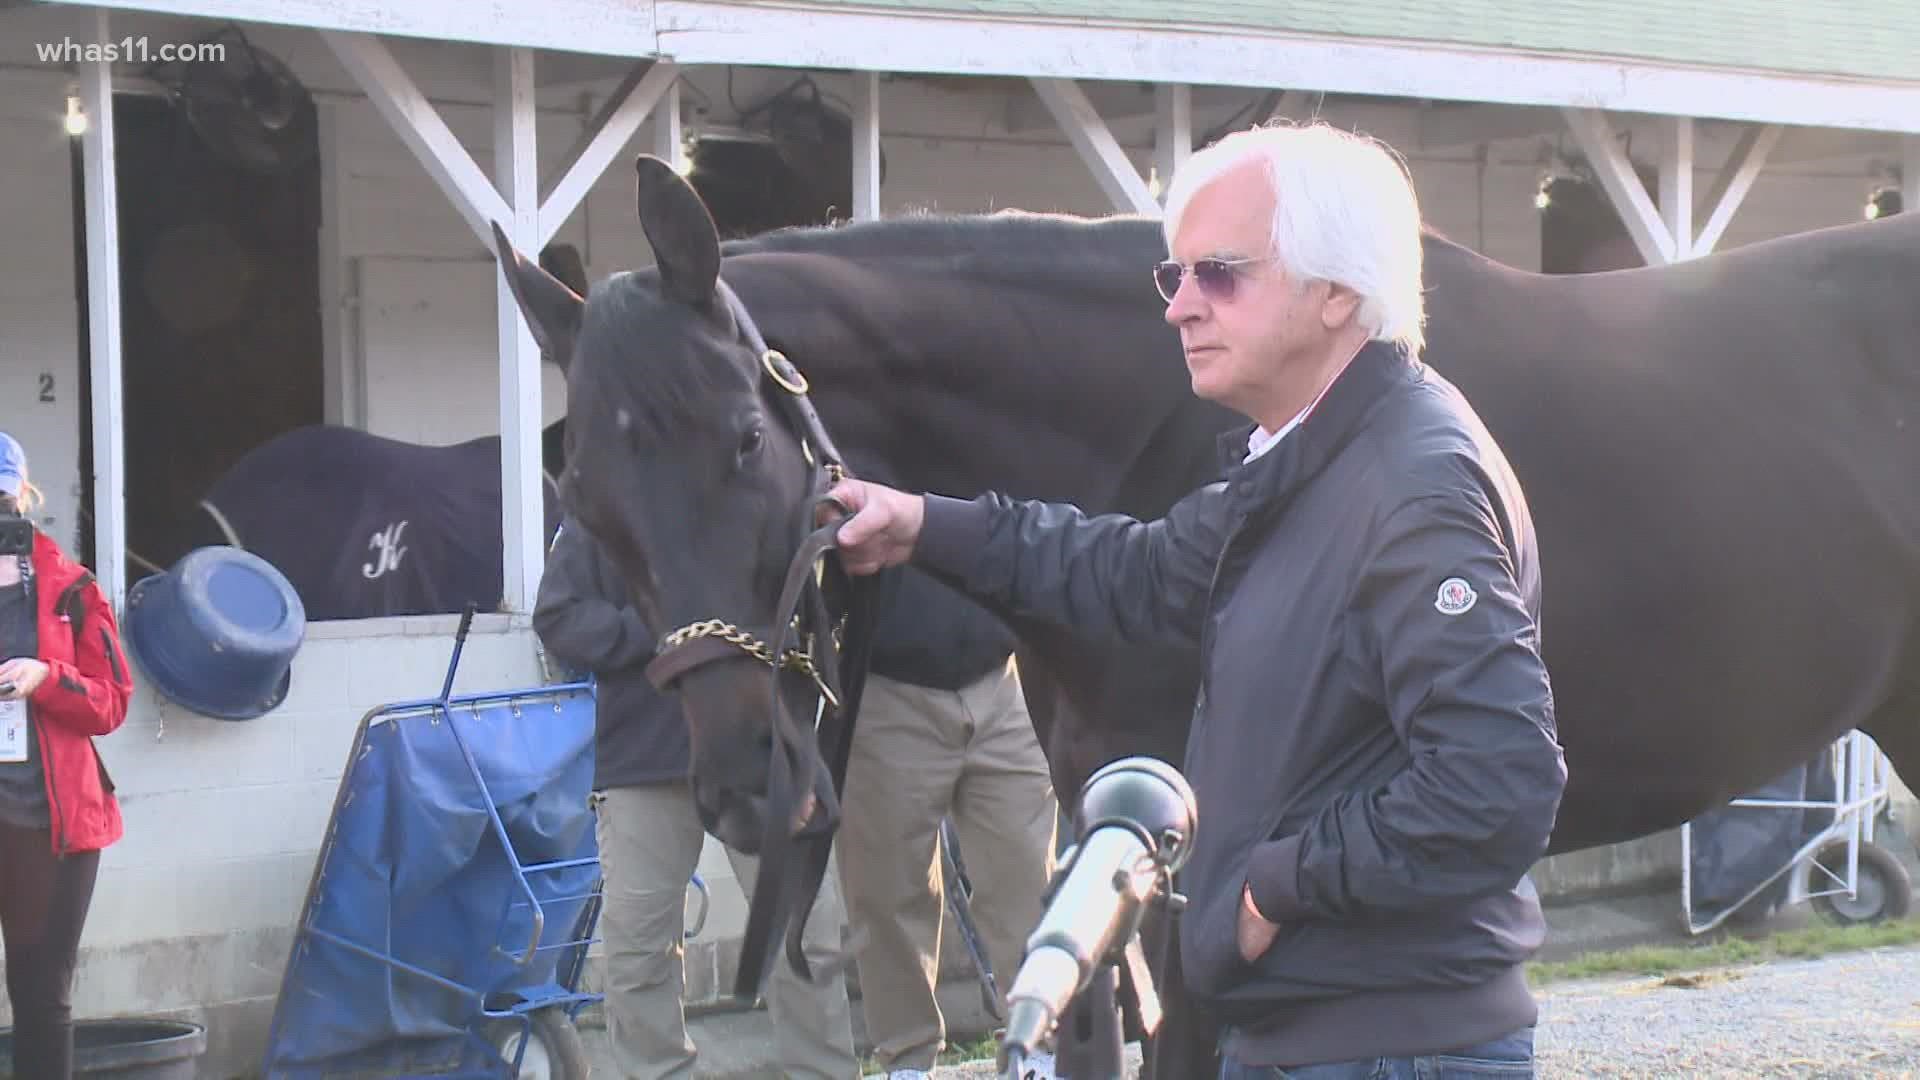 The New York Racing Association has charged Bob Baffert with detrimental conduct and scheduled a hearing for the two-time Triple Crown-winning trainer to respond to